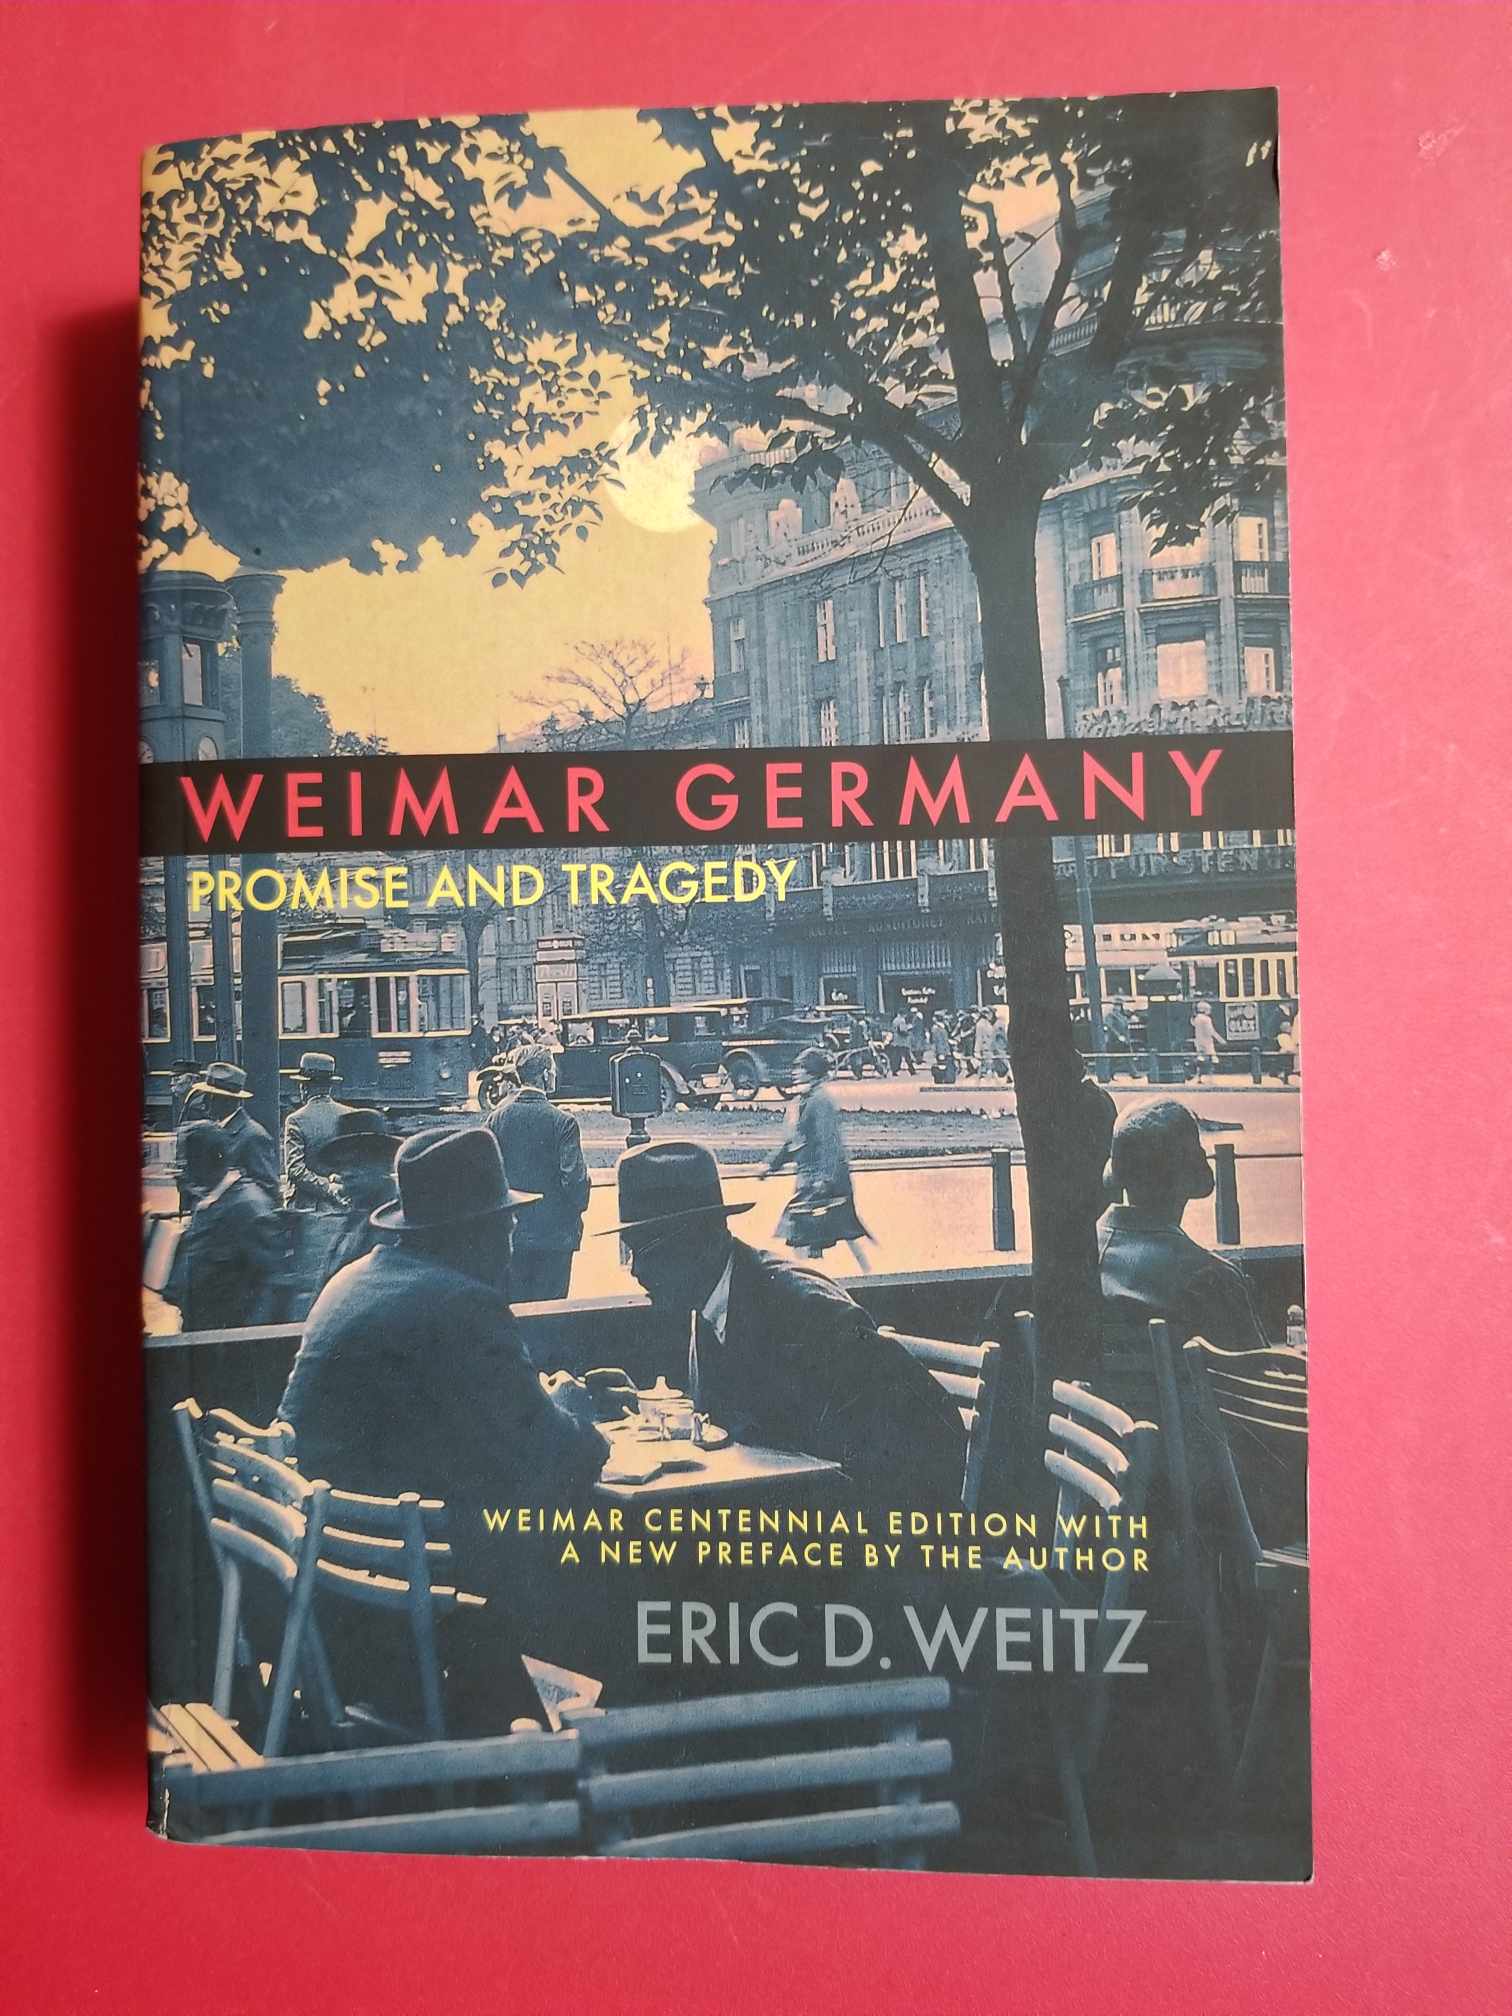 Weimar Germany, Promise and Tragedy